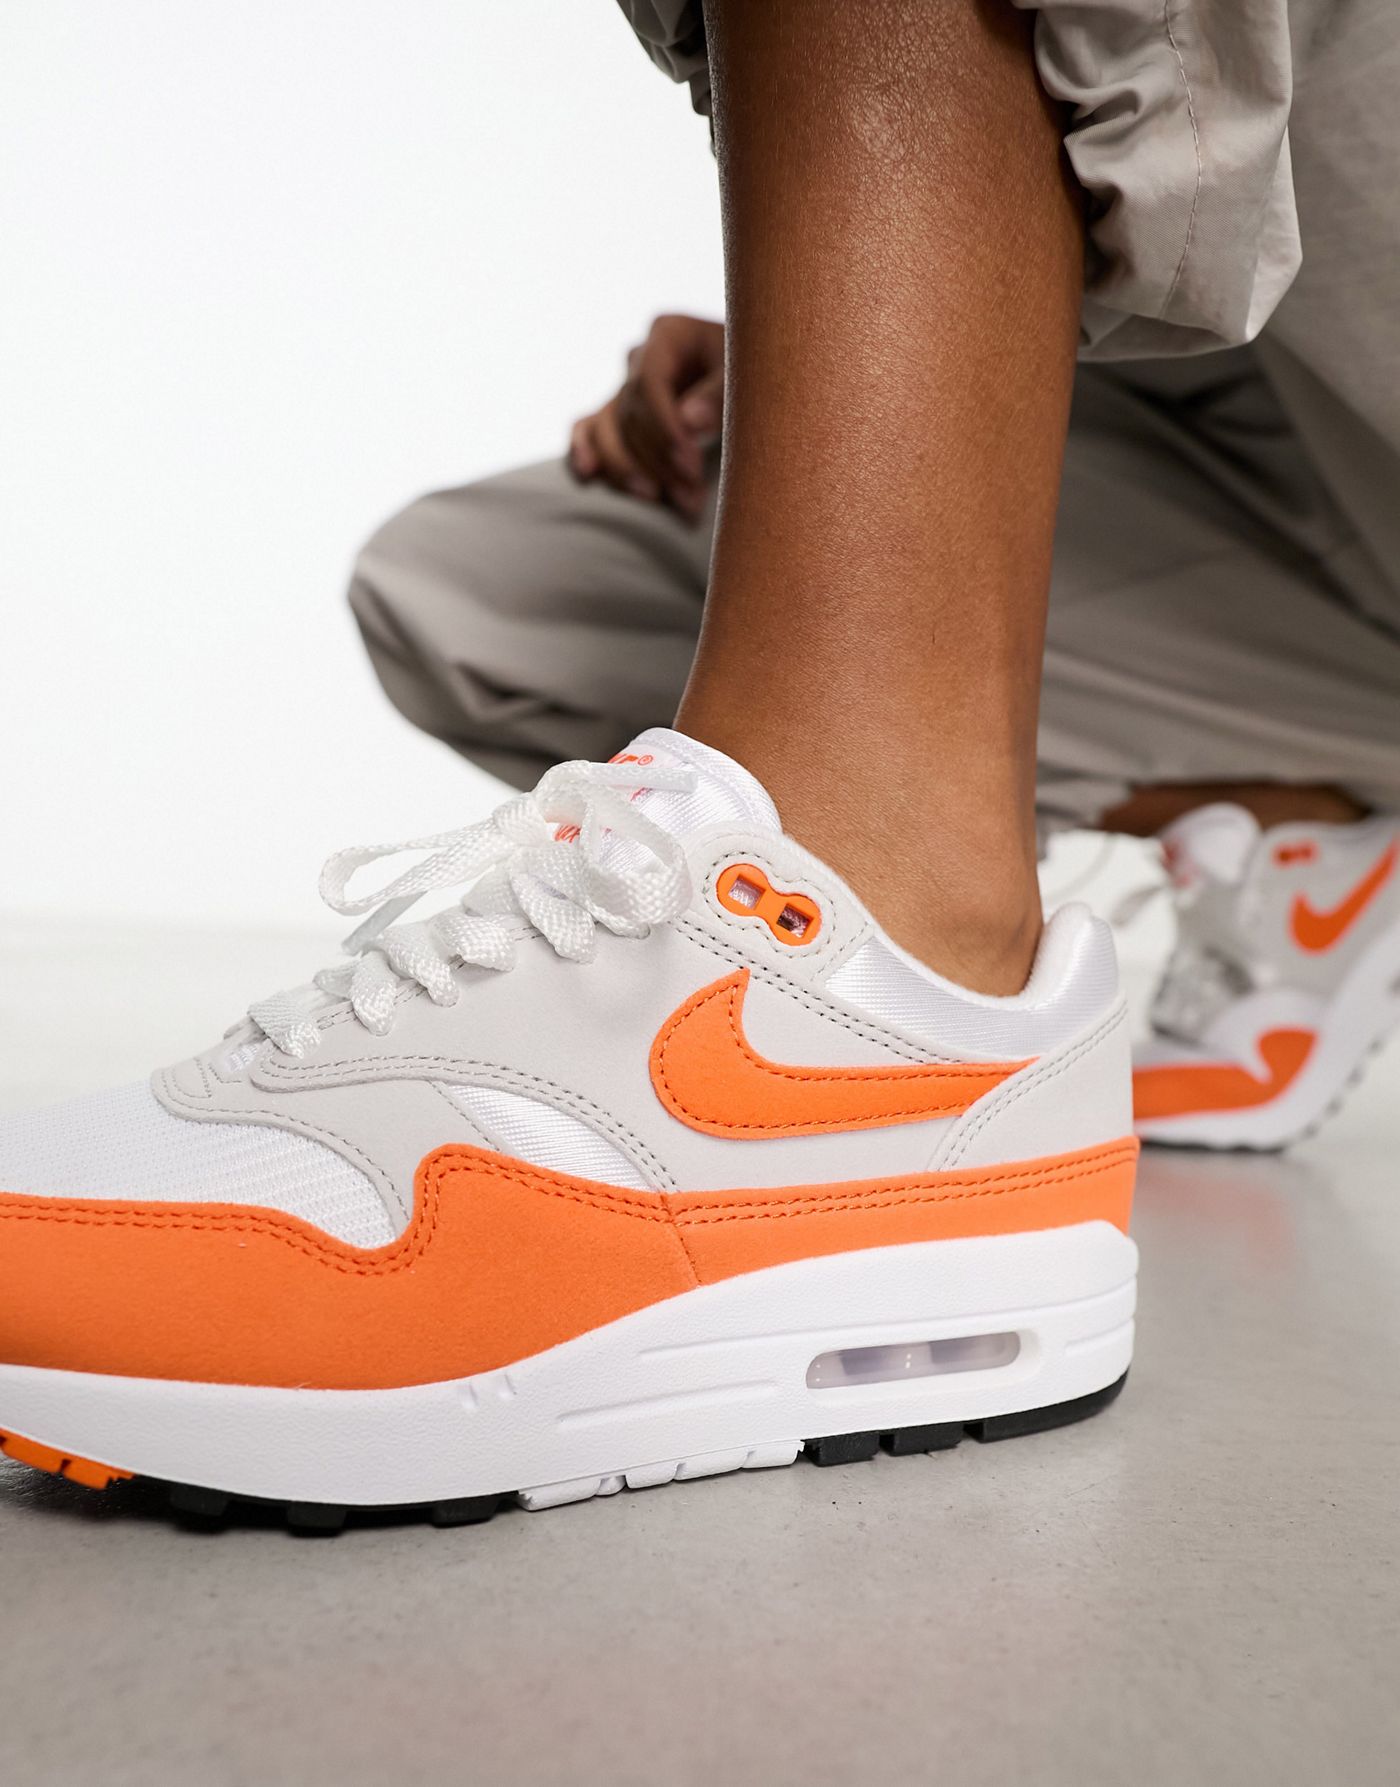 Nike Air Max 1 trainers in grey and safety orange